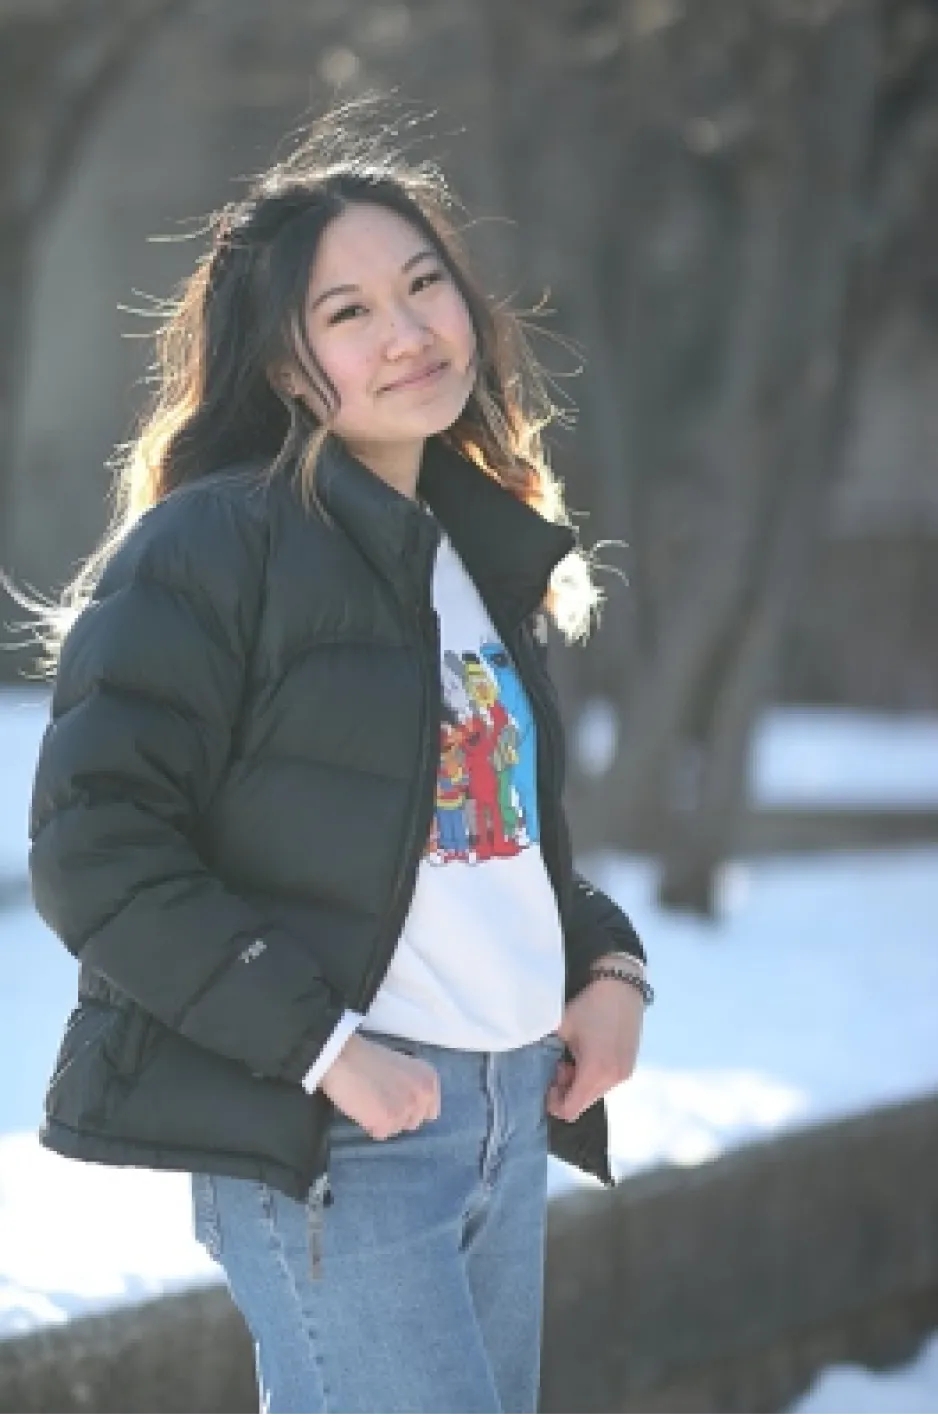 A young woman with pale skin, long, black hair with orange-blonde ends, wearing a black puffer jacket, a white sweatshirt with Sesame Street characters, and blue jeans smiling against a snowy winter background.